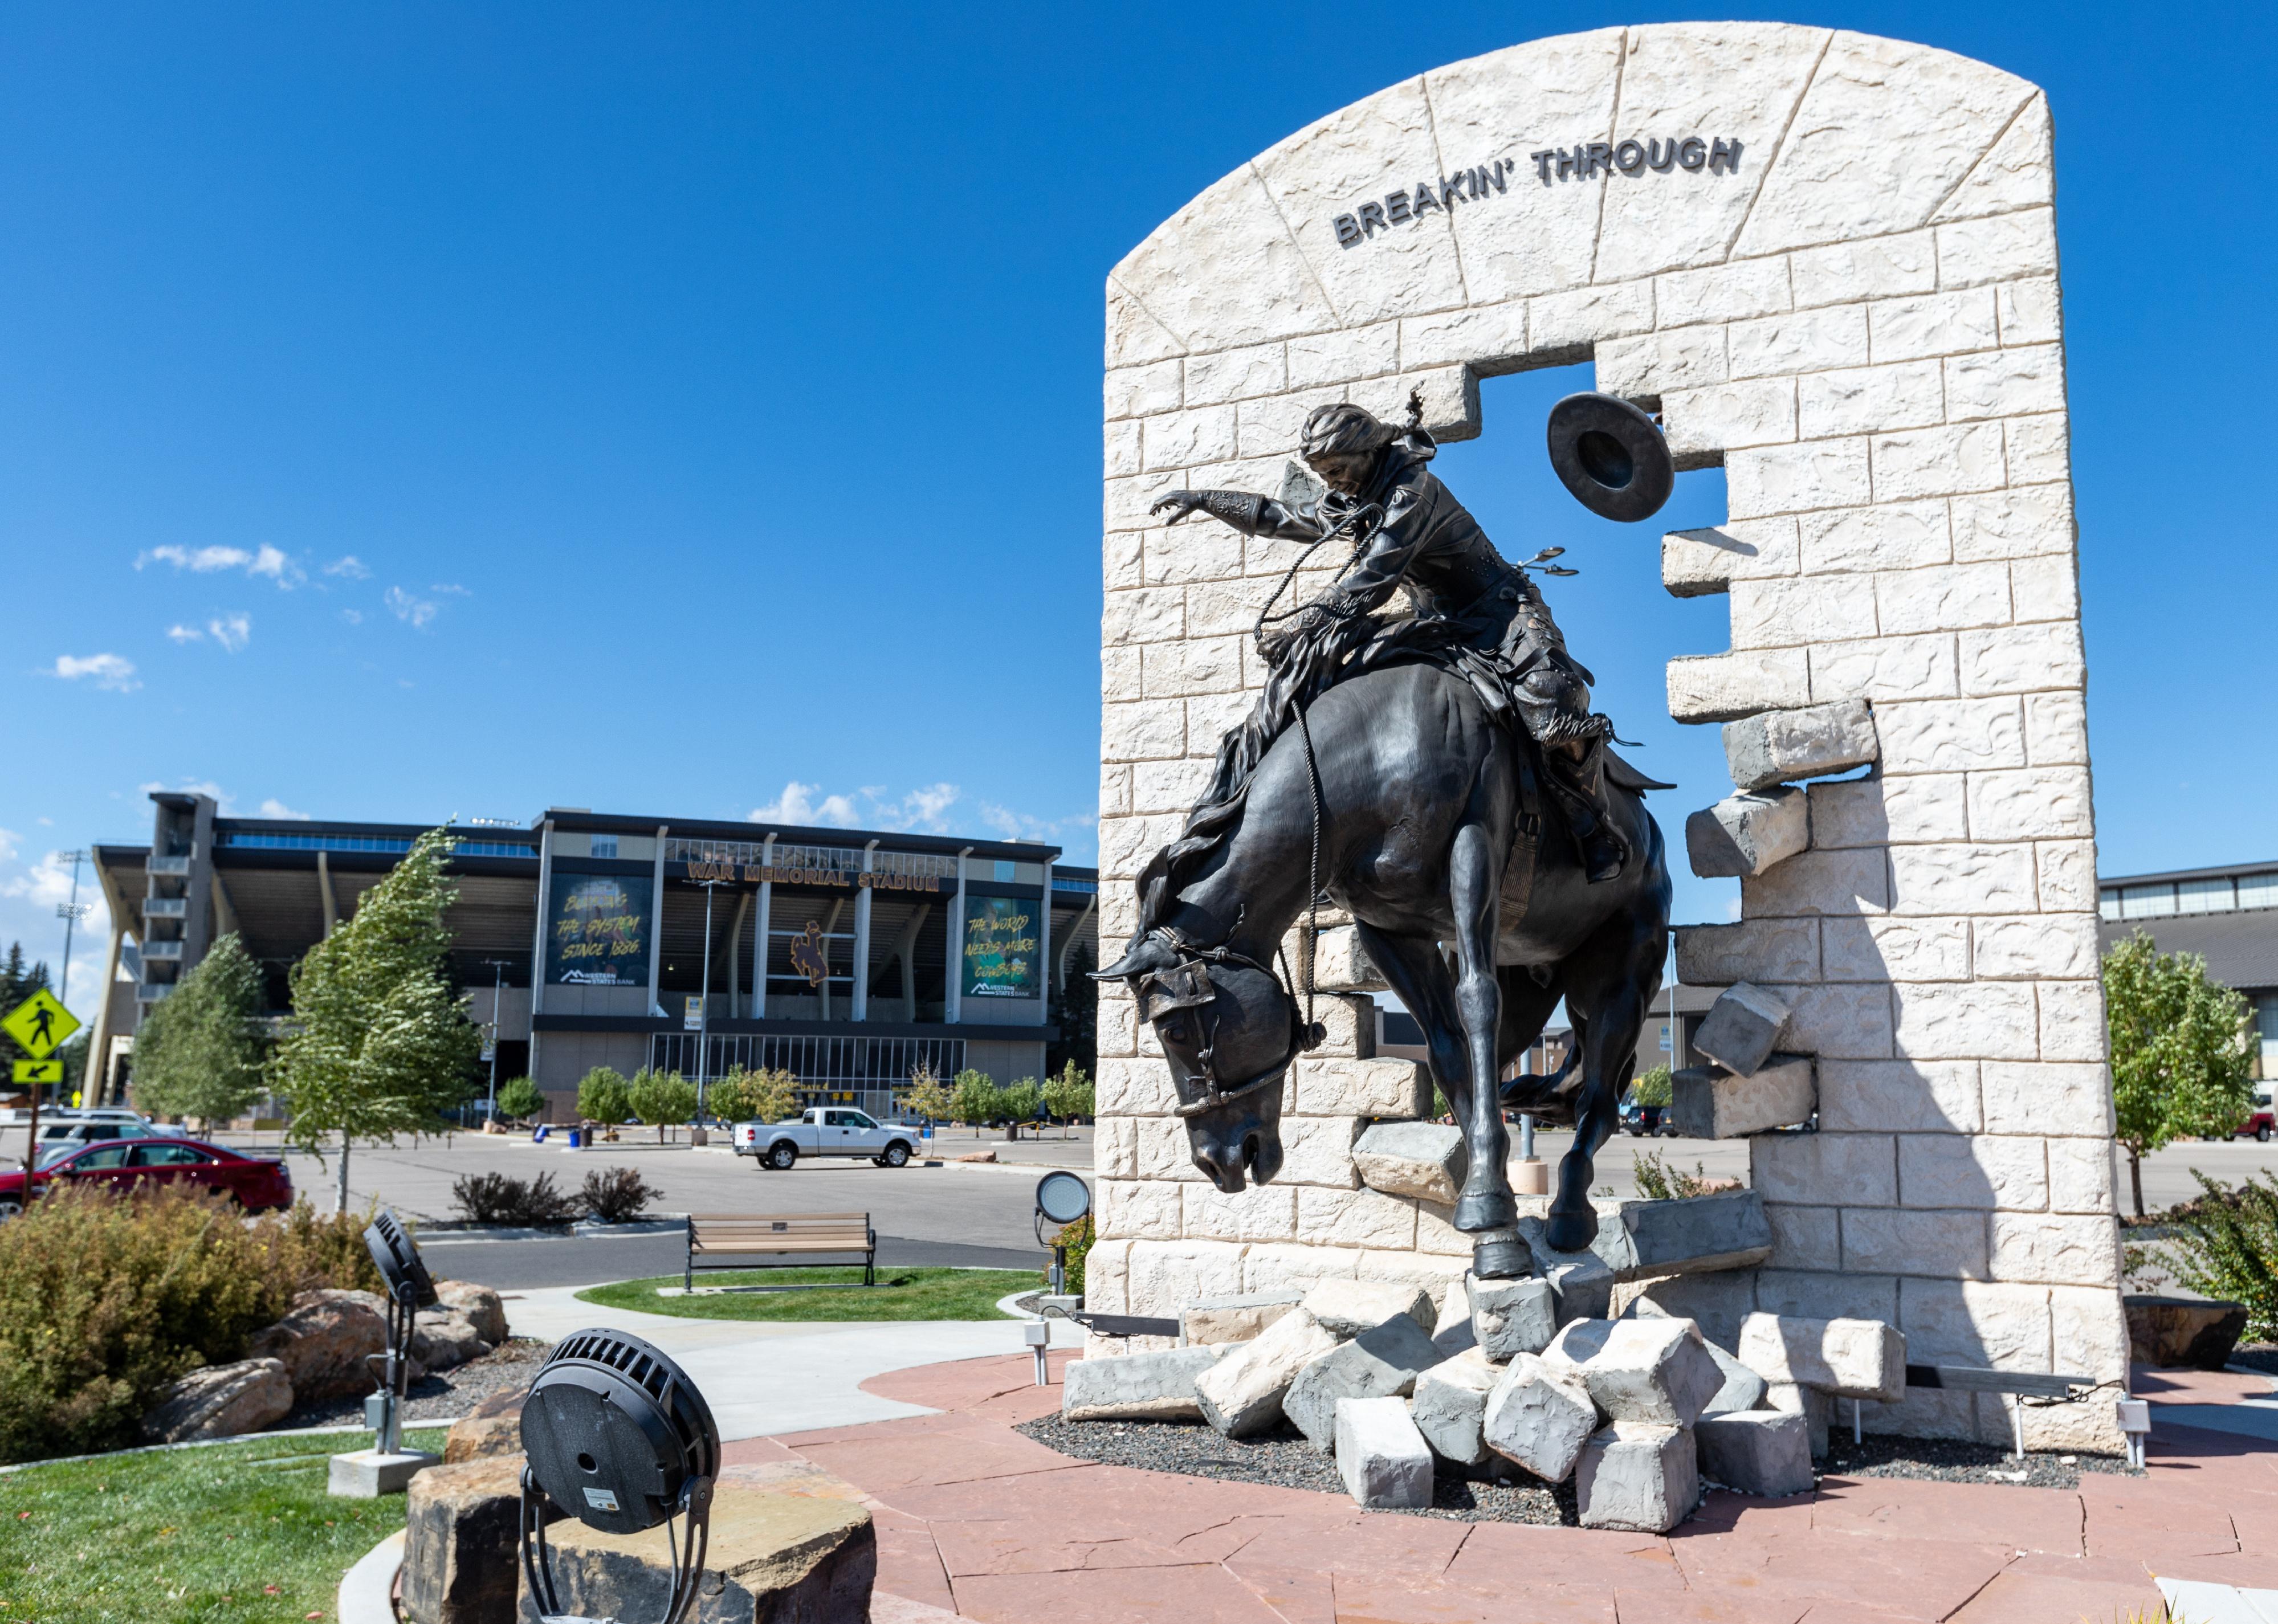 <p>- Population: 31,501<br> - National rank: Not Ranked</p>  <p>Laramie is home to the University of Wyoming, but it's far more than a college town. Visit the <a href="https://www.uwyo.edu/artmuseum/">University of Laramie Art Museum</a> or take a drive up to the eastern edge of the Rocky Mountains. The <a href="https://www.visitlaramie.org/things-to-do/outdoors-and-recreation/hiking/snowy-range-mountains/">Snowy Range Mountains</a> are just east of Medicine Bow National Forest, where outdoor enthusiasts can camp, hike, or spot local wildlife.</p>